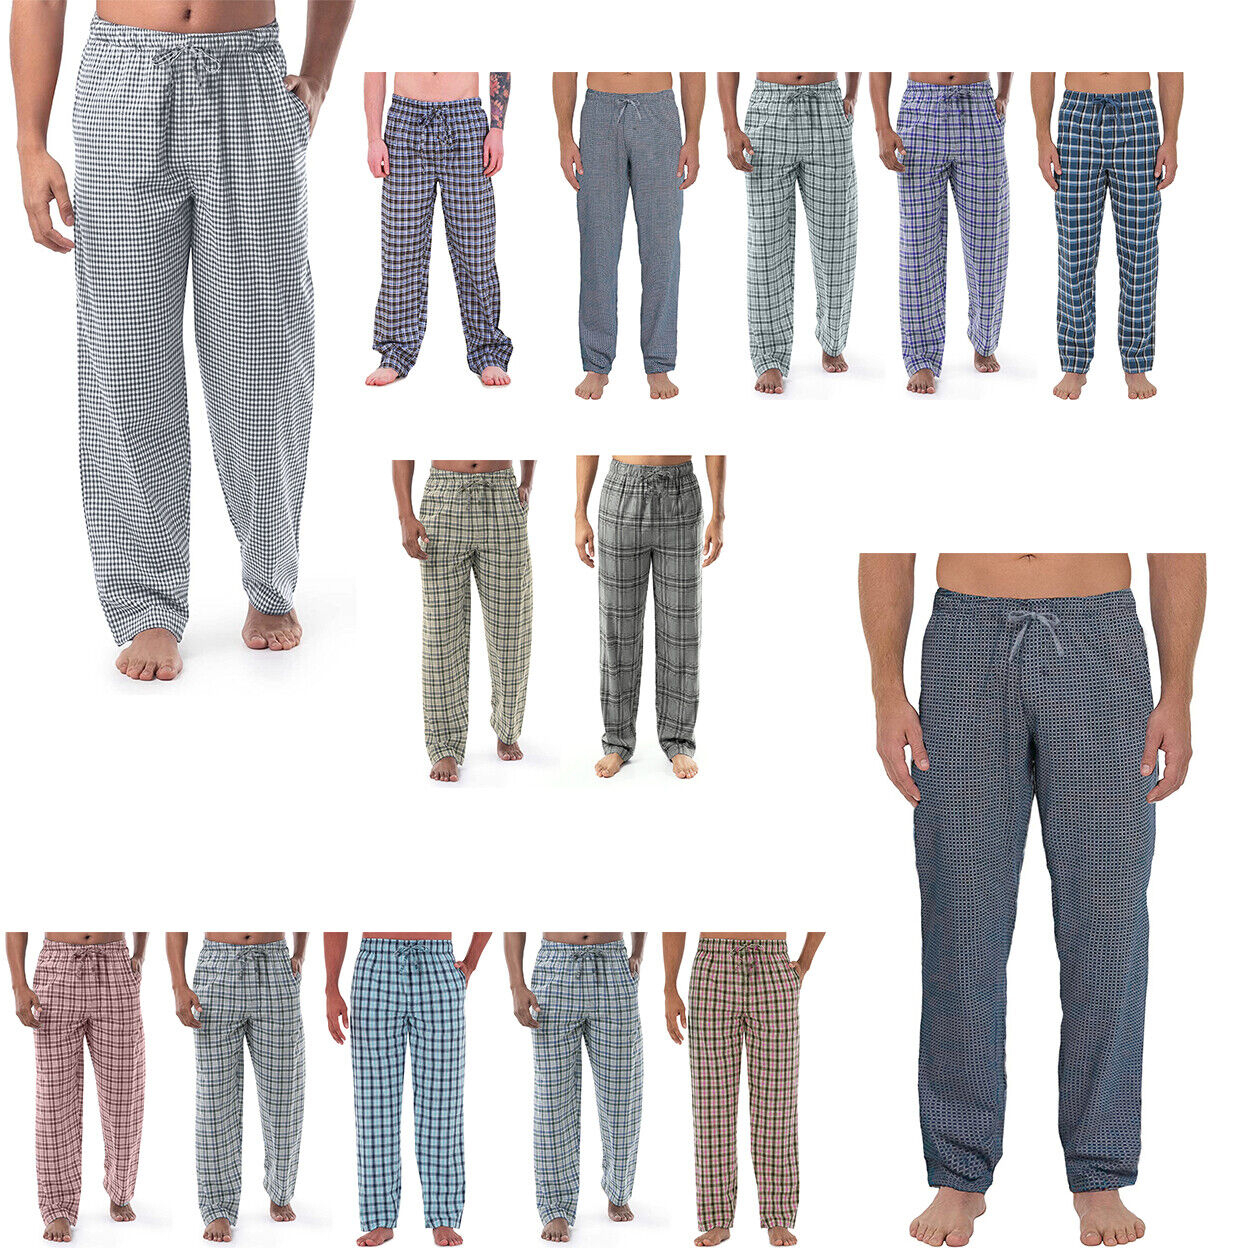 Multi-Pack: Men's Ultra-Soft Solid & Plaid Cotton Jersey Knit Comfy Sleep Lounge Pajama Pants - 1-pack Plaid, Xx-large